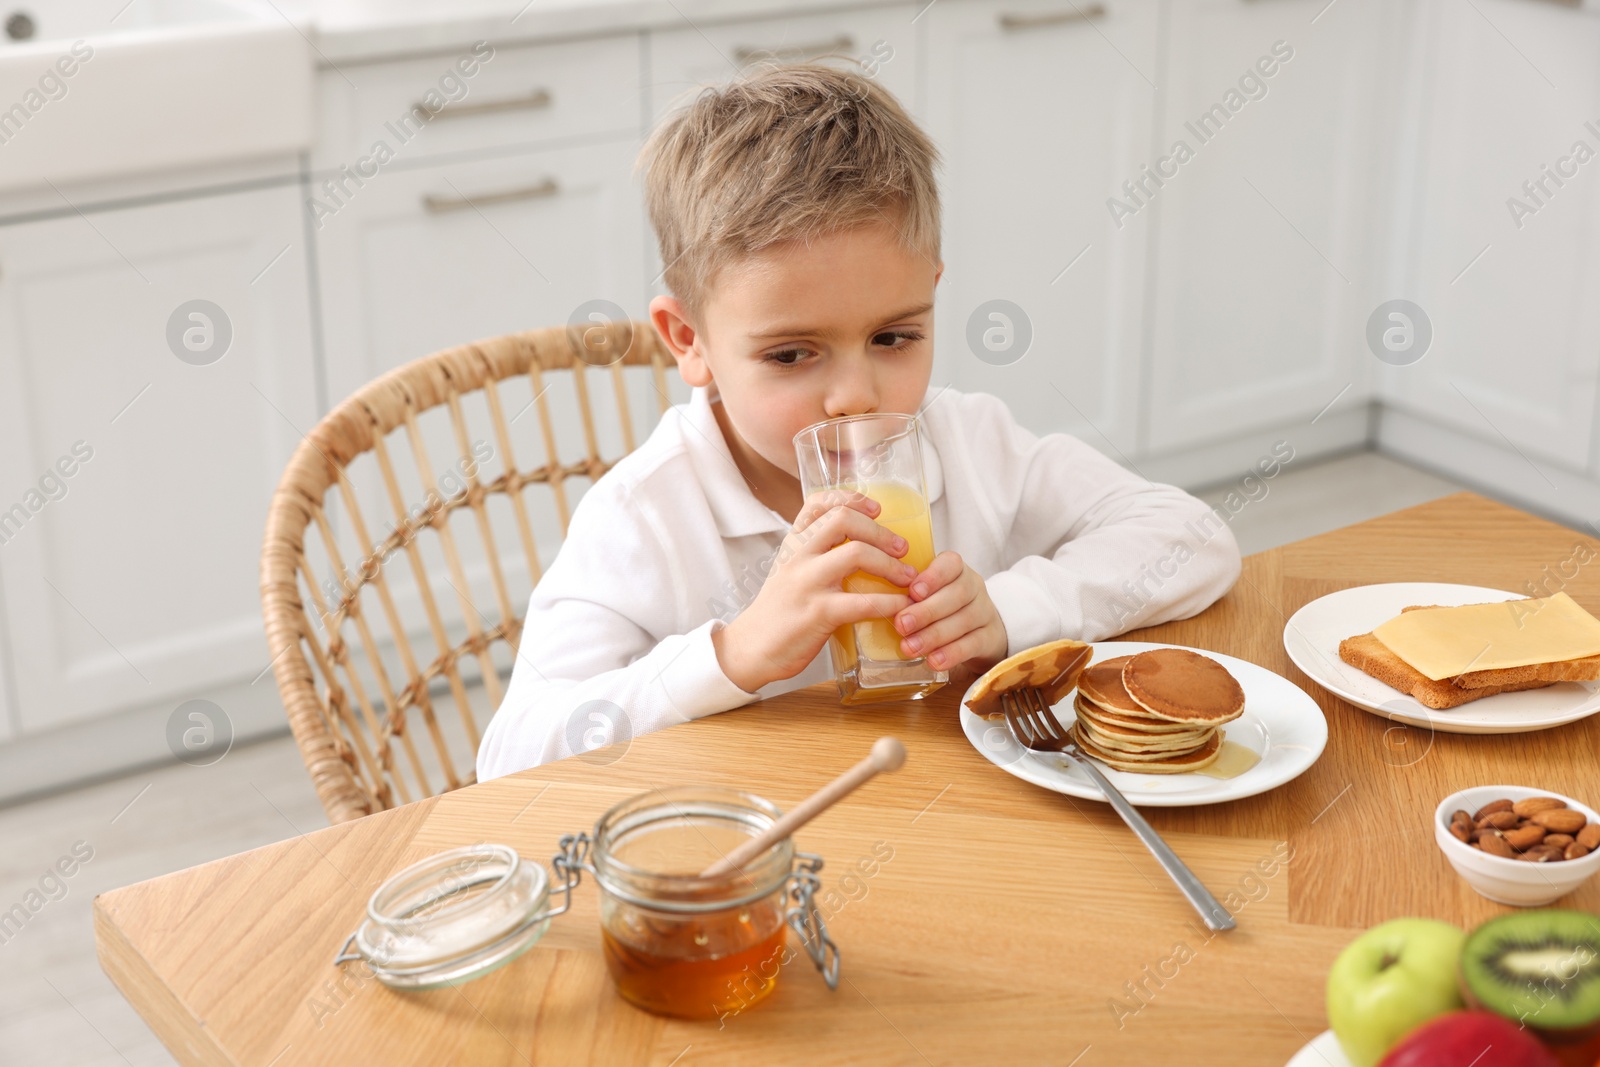 Photo of Breakfast time. Cute little boy drinking juice at table in kitchen